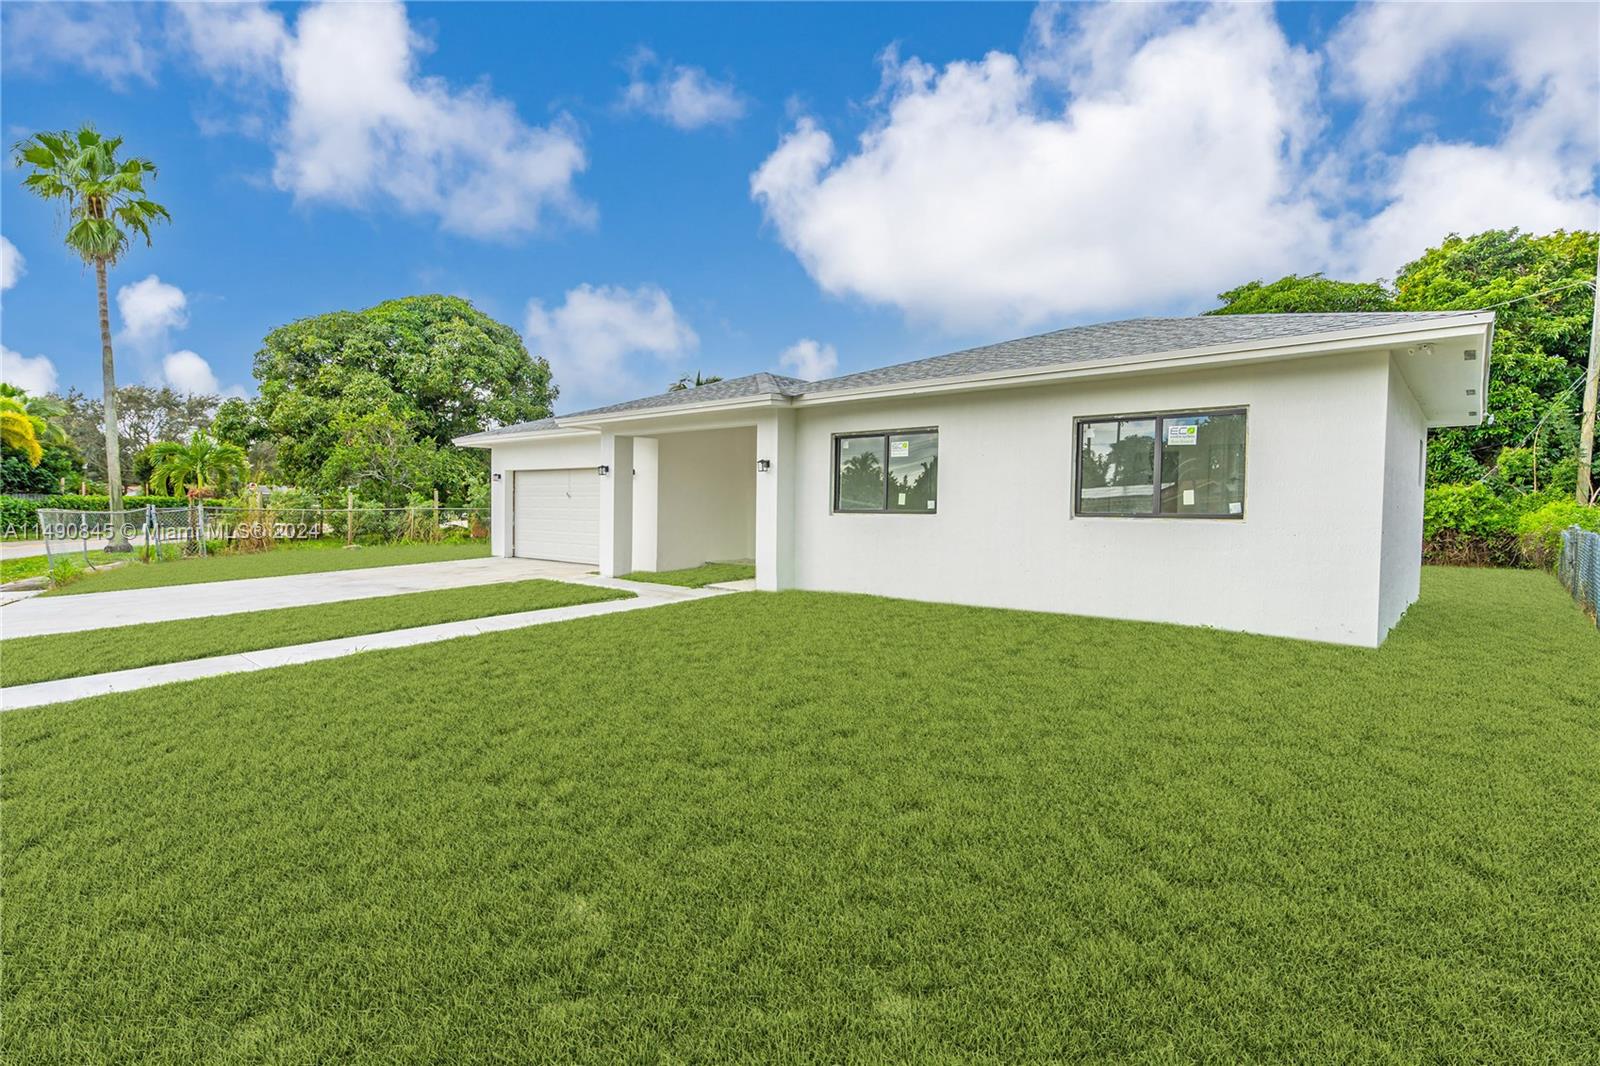 1511 Nw 10th Ave, Fort Lauderdale, Broward County, Florida - 4 Bedrooms  
2 Bathrooms - 